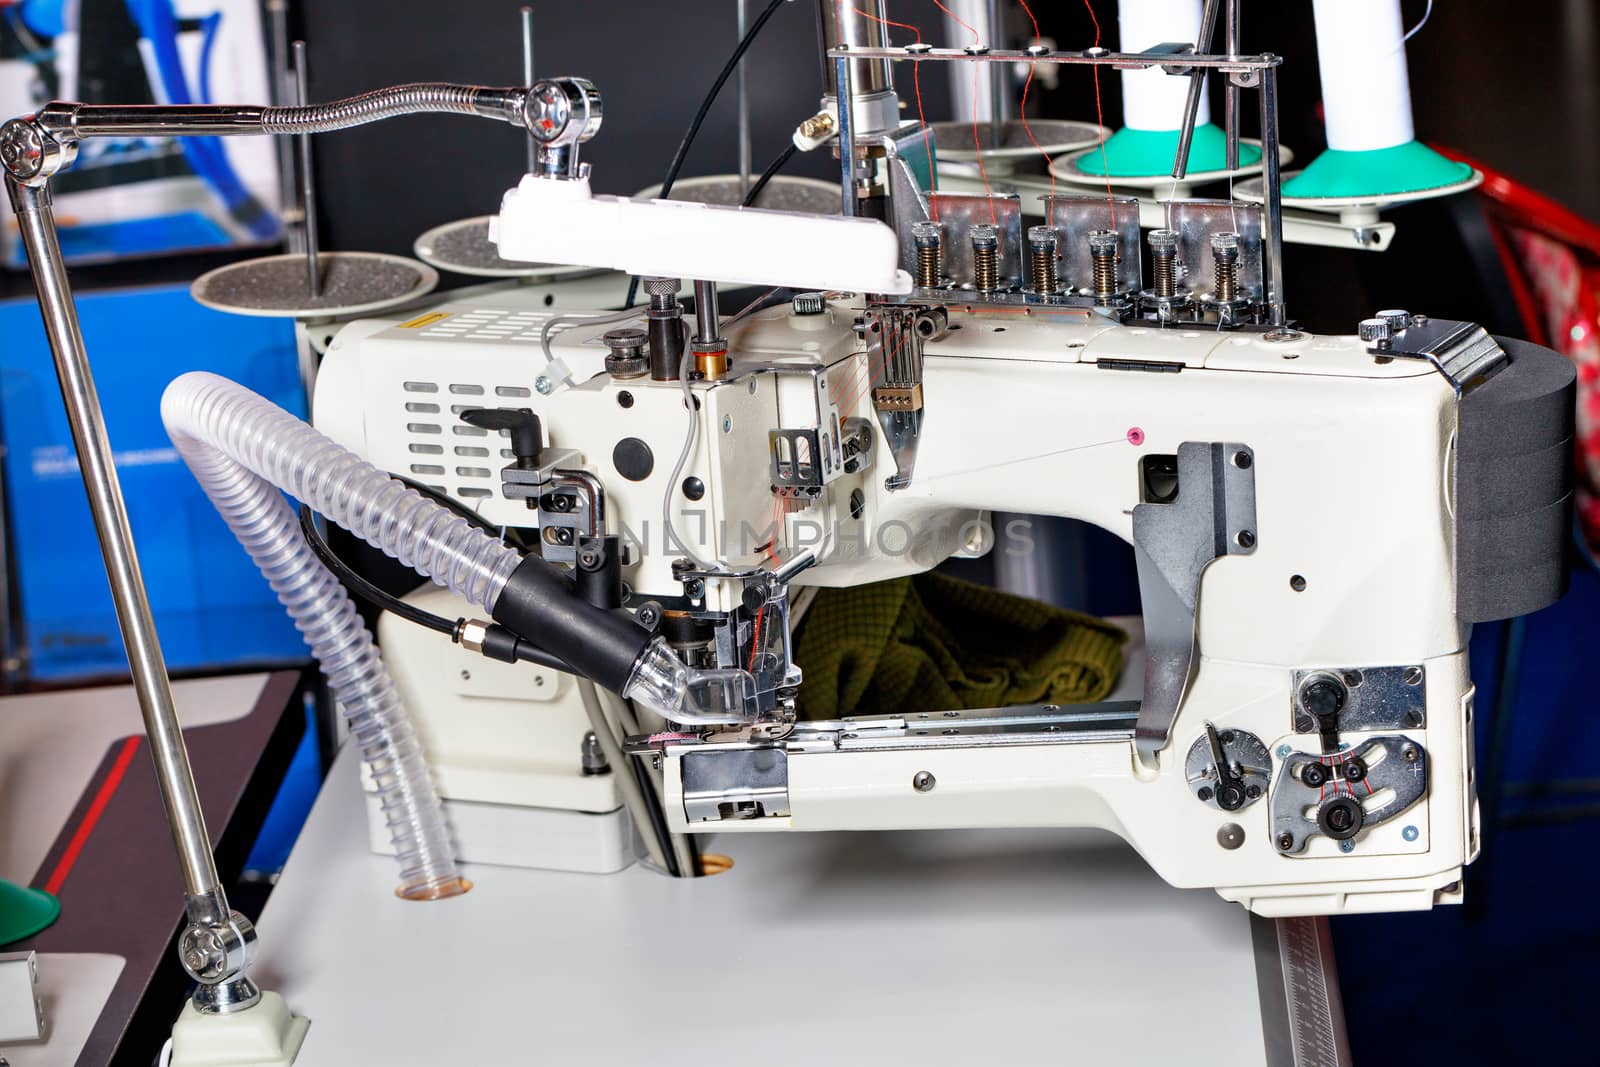 Professional overlock knitting and sewing machine, sewing equipment, close-up. by Sergii